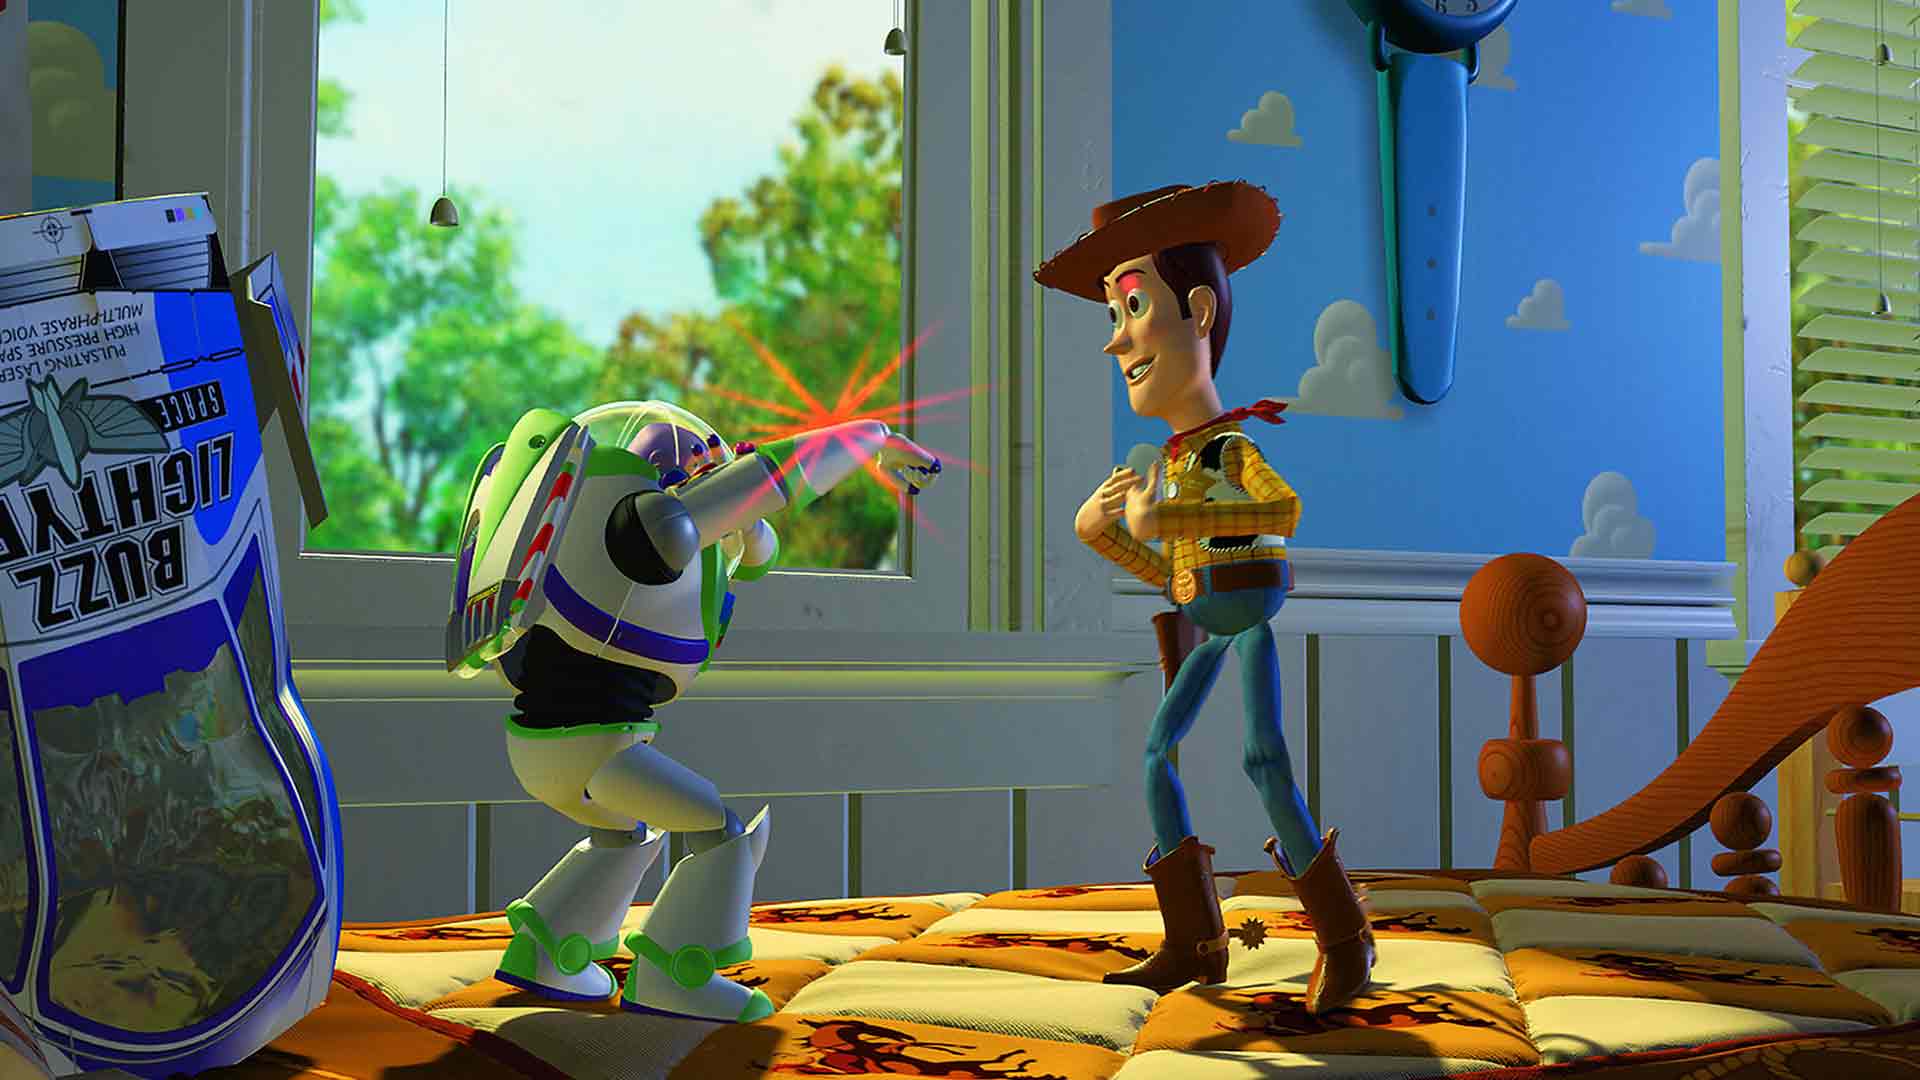 Bazlite and Woody in the room in the toy story animation 1